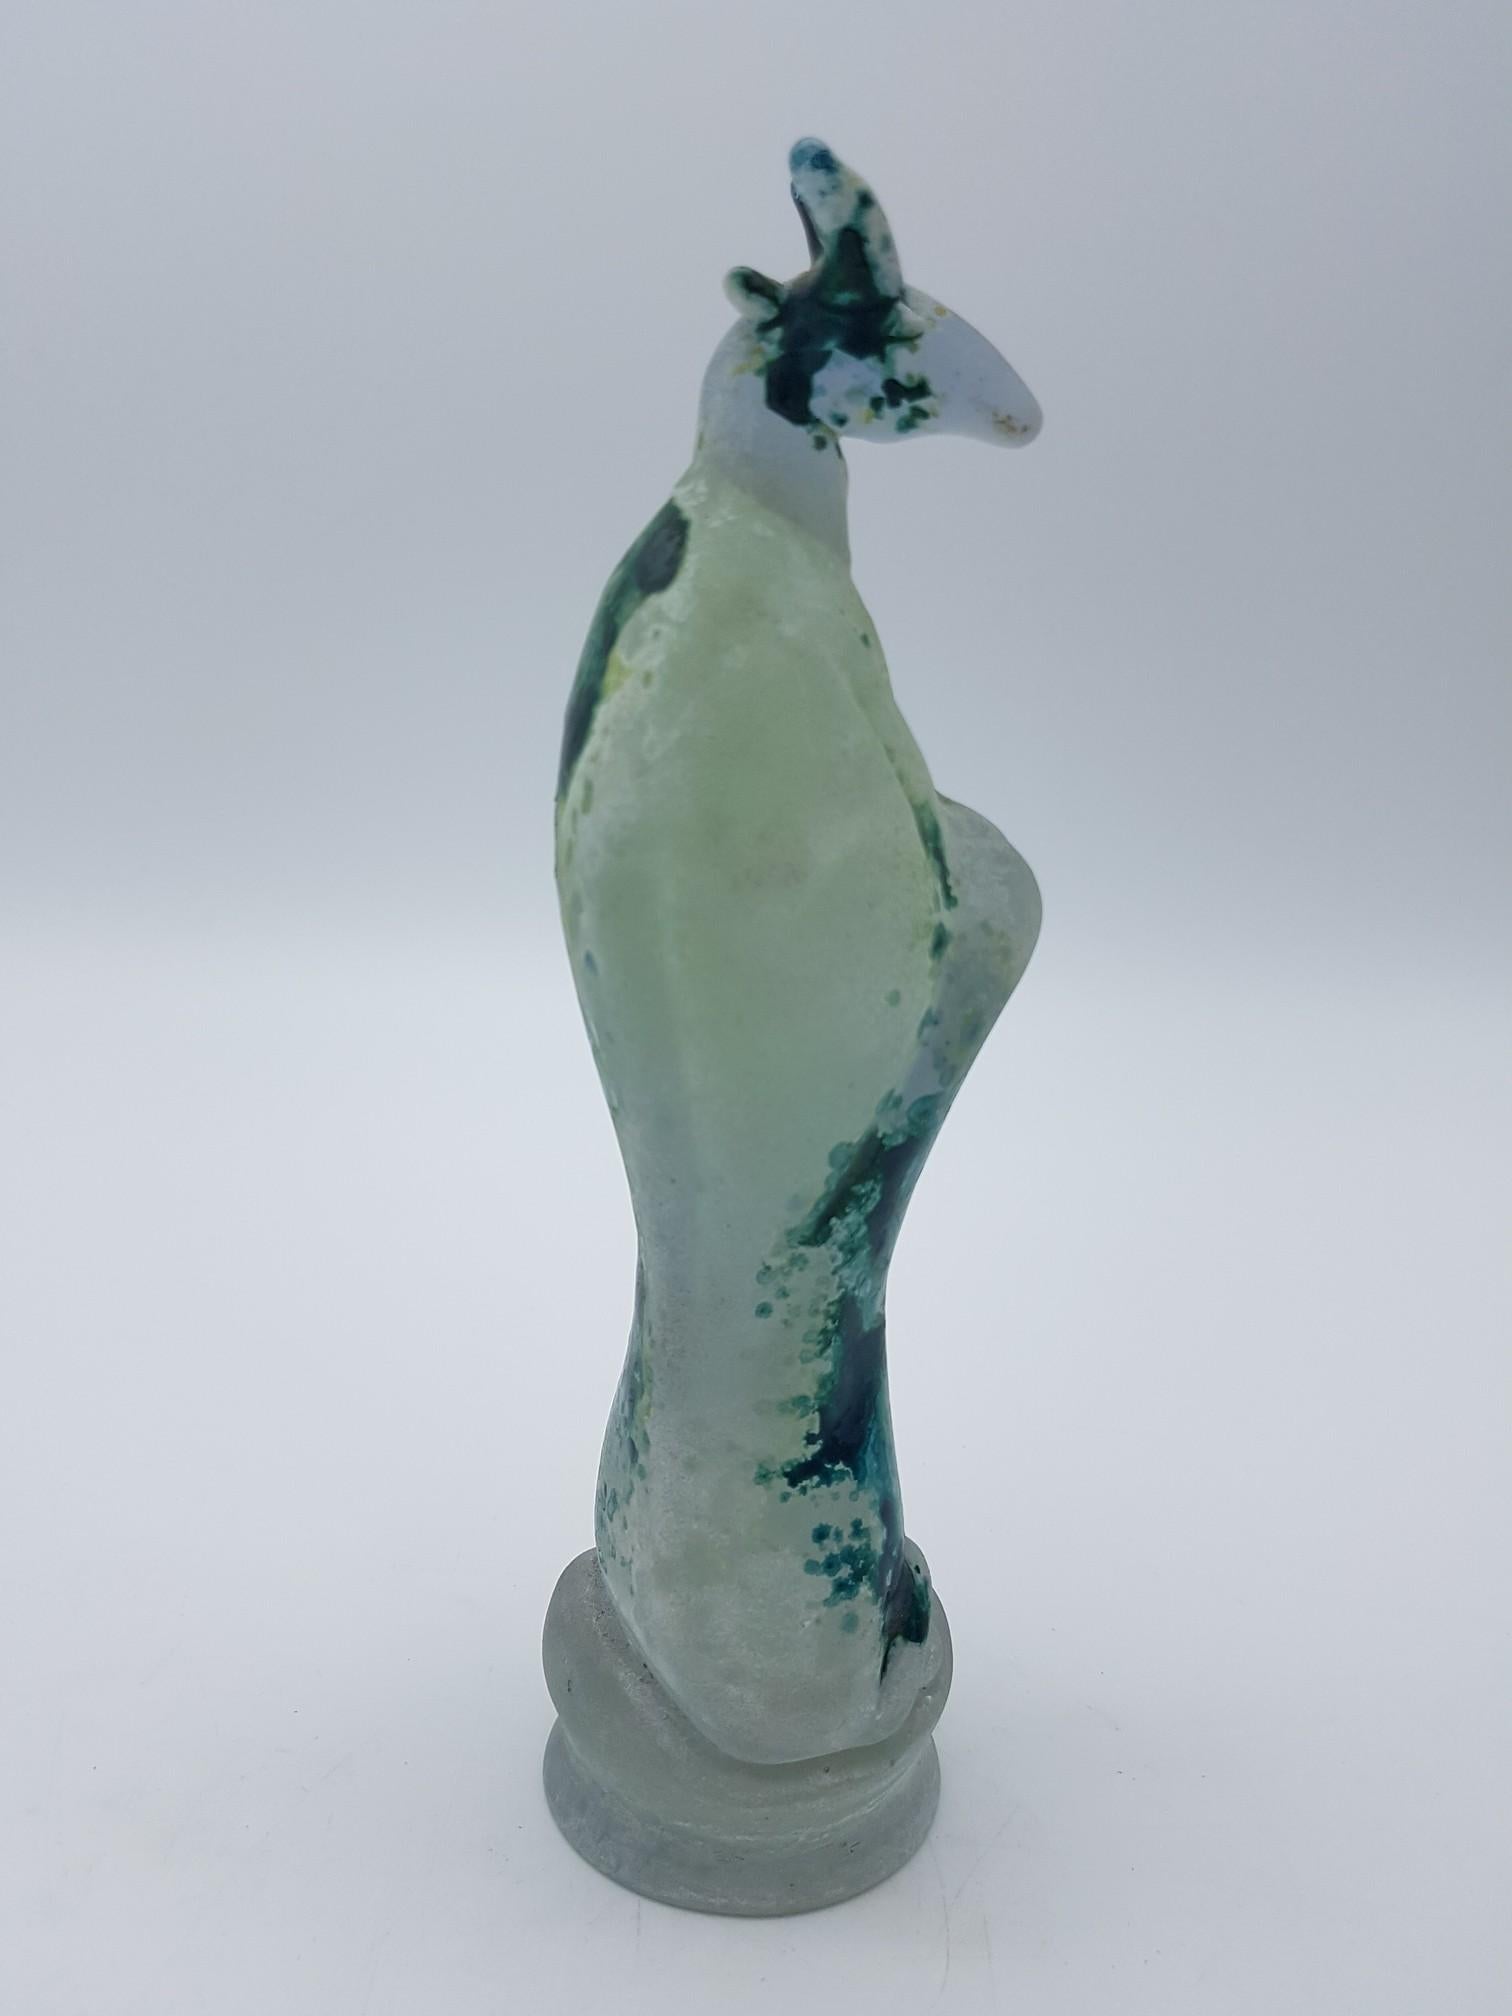 Pair of Rare Vintage Murano Glass Zoomorphic Satuettes by E. Nason at Cenedese For Sale 8